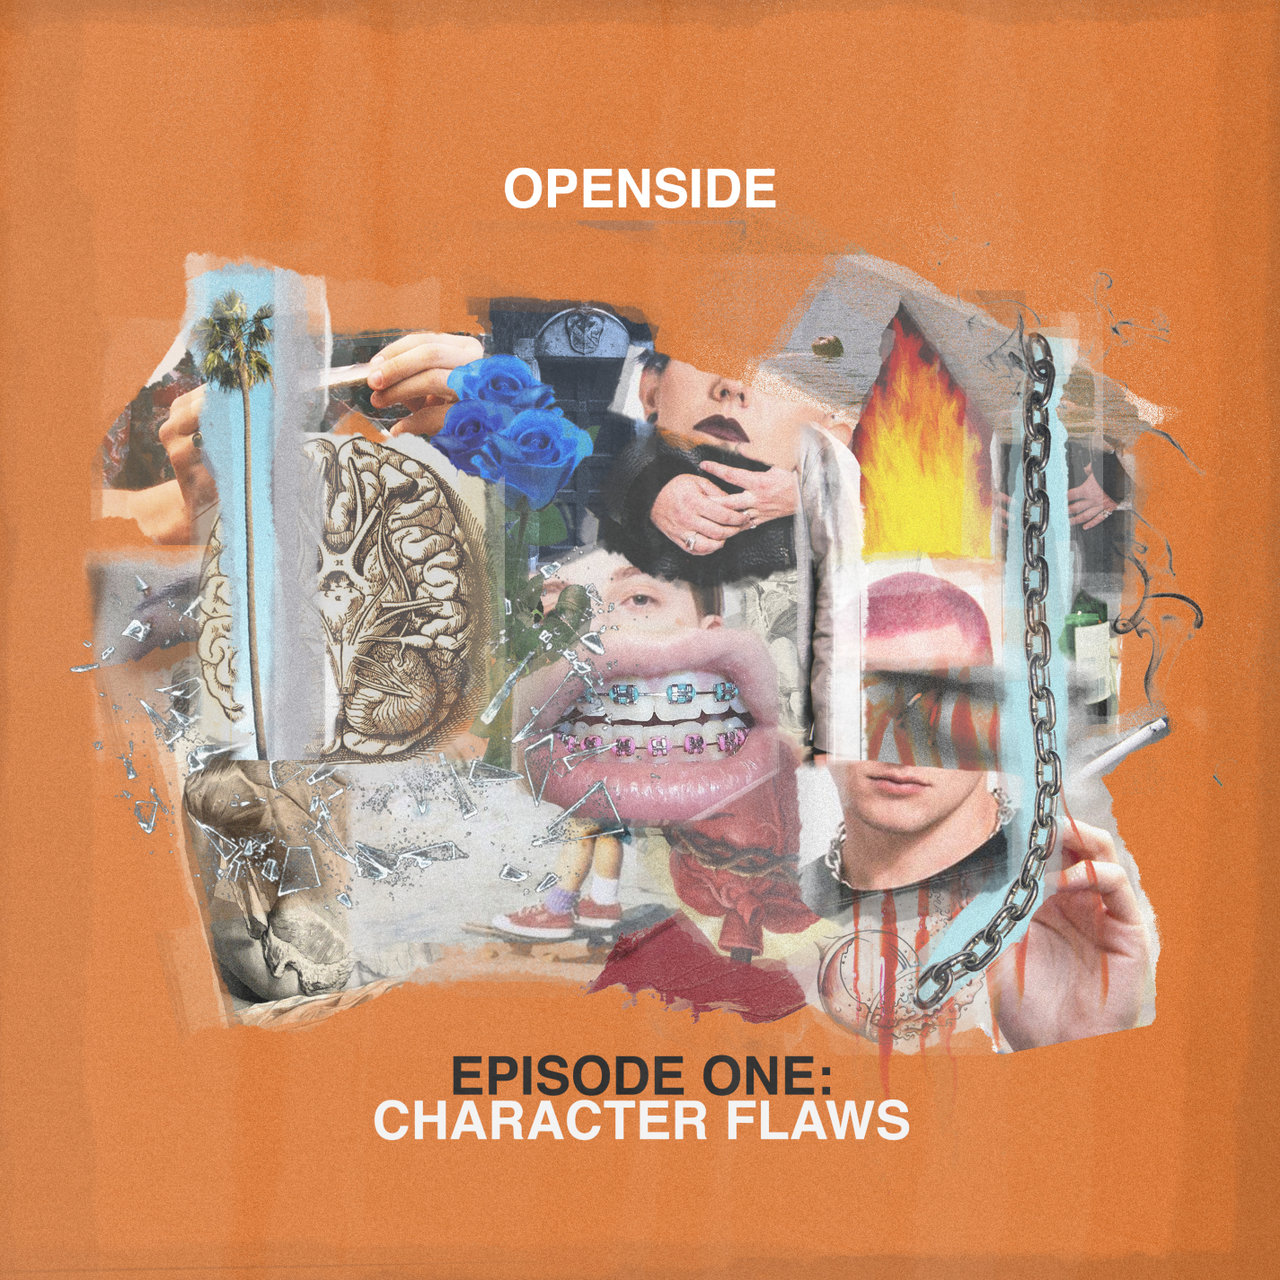 Openside Episode One: Character Flaws cover artwork